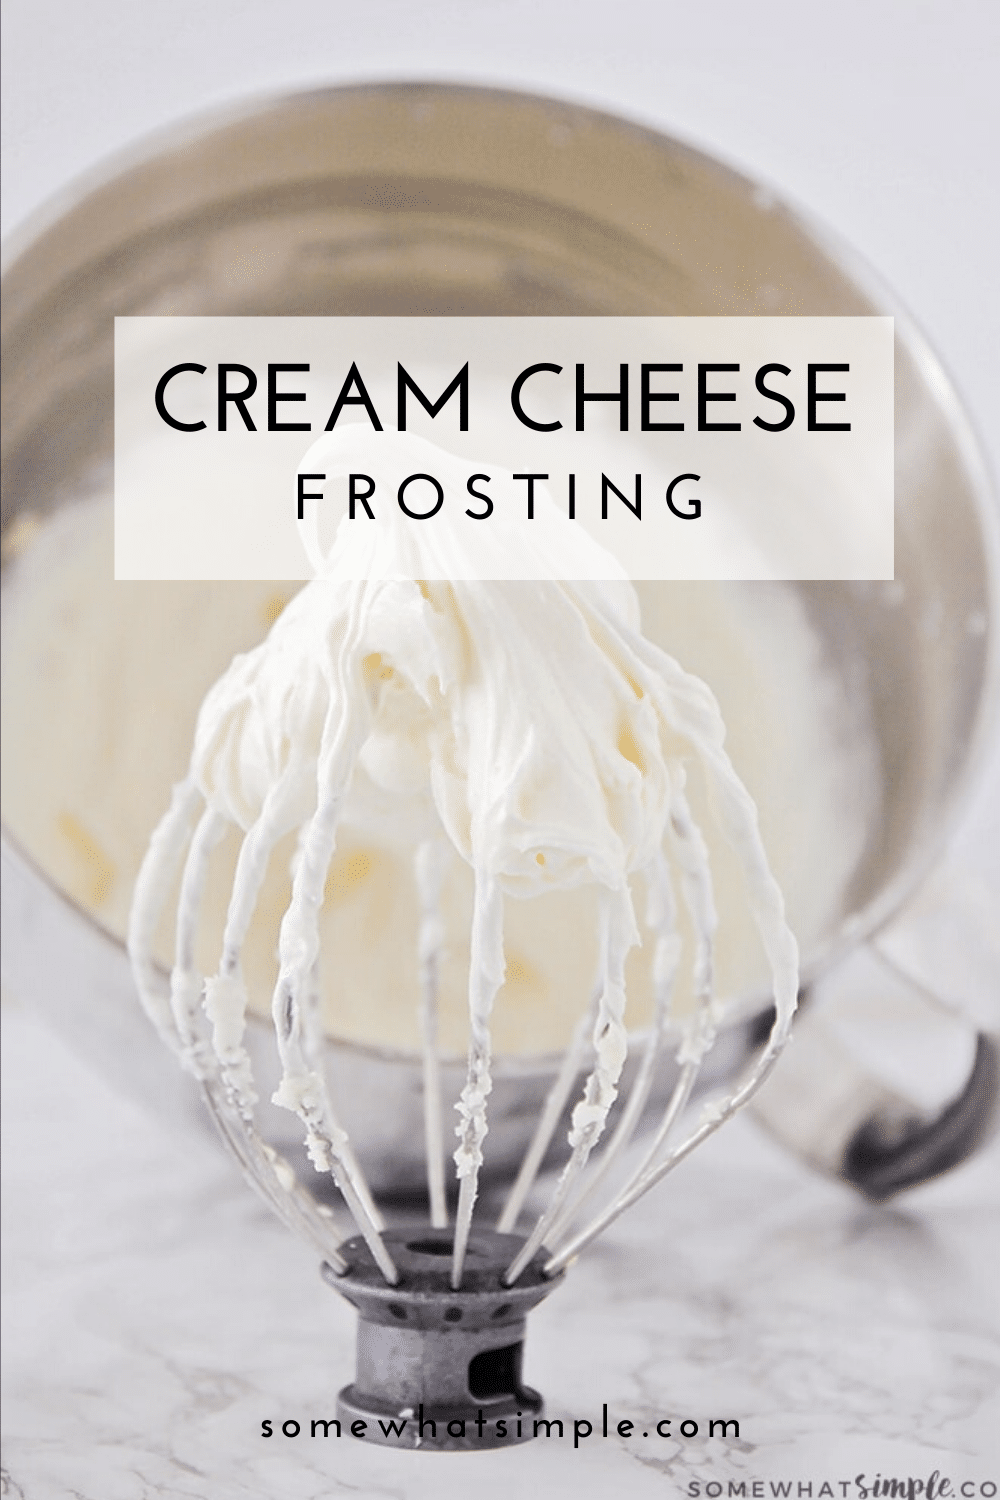 This simple, 6-ingredient cream cheese frosting is easy to make and pipe onto your favorite baked goods. You’ll never want (or need!) another frosting recipe. via @somewhatsimple